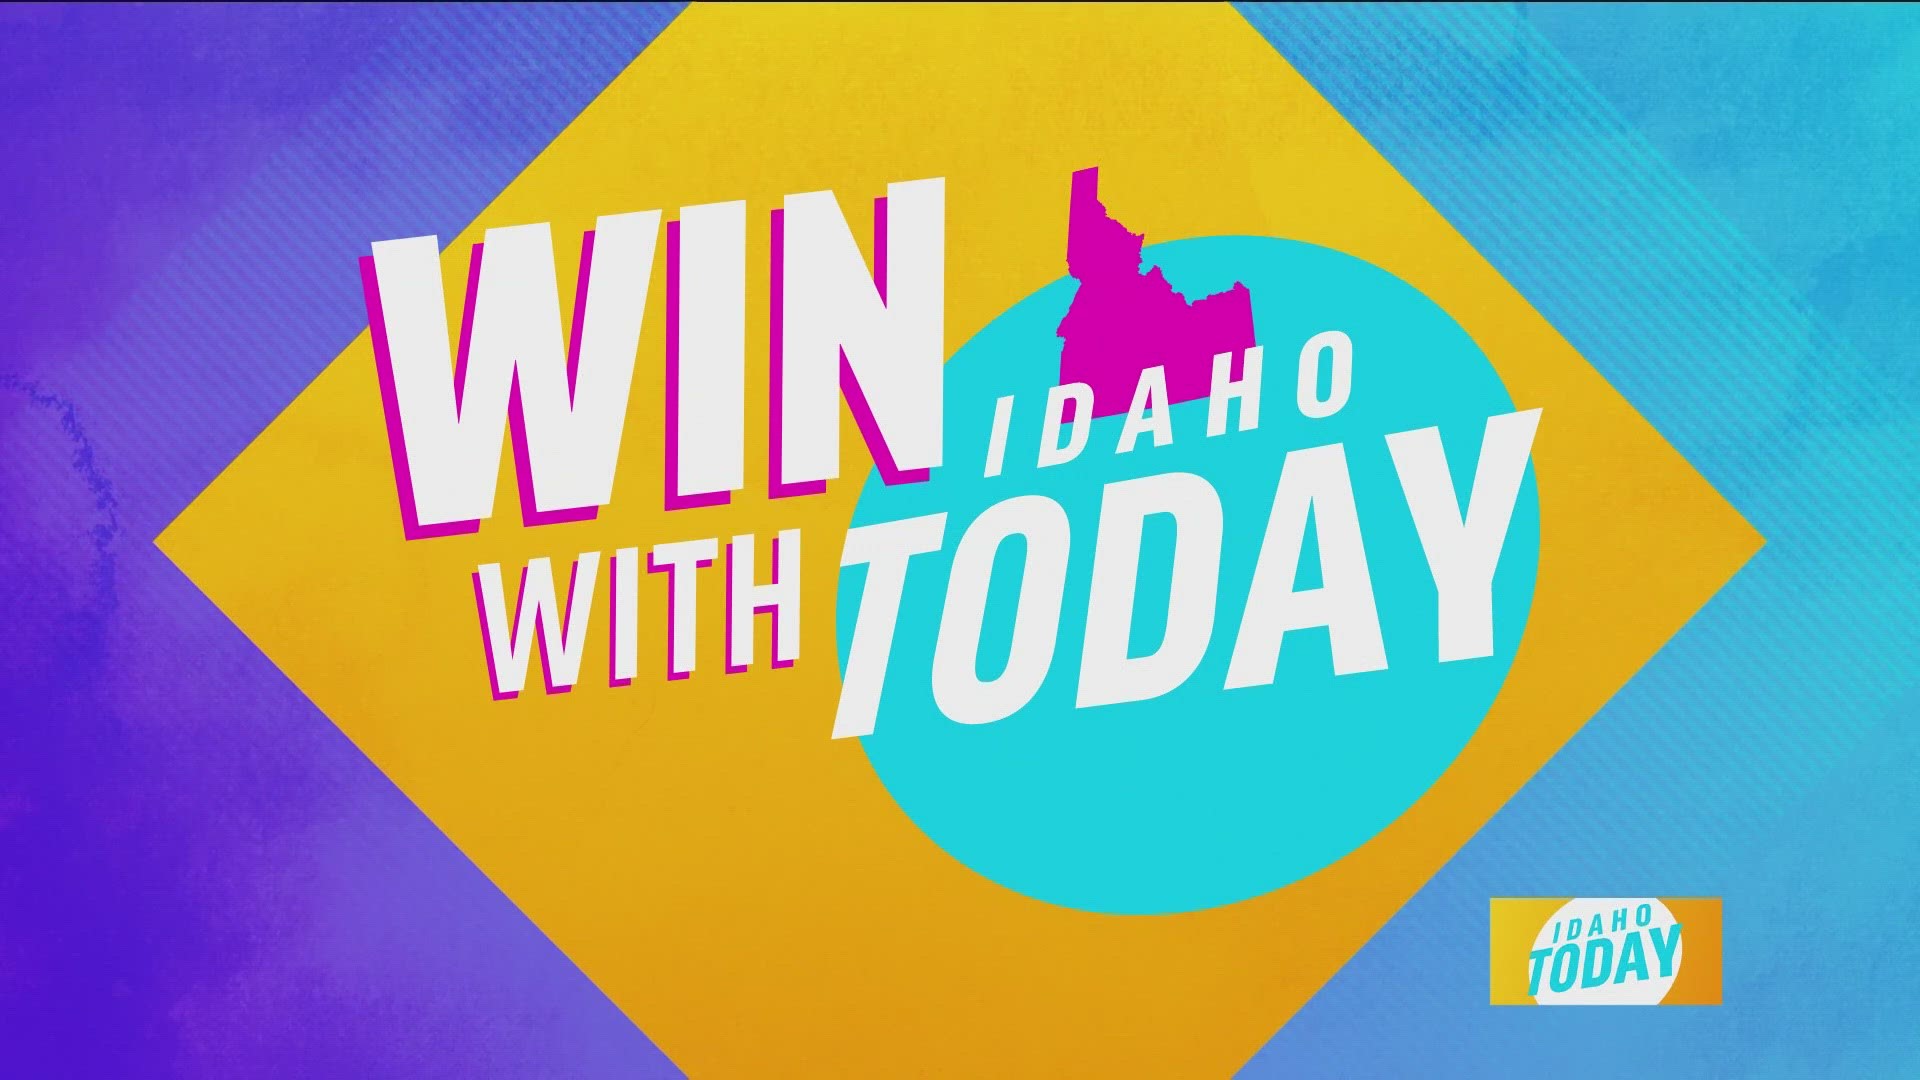 Idaho Today is doing a flash giveaway on their social pages, Idaho Today on Facebook and on Instagram!